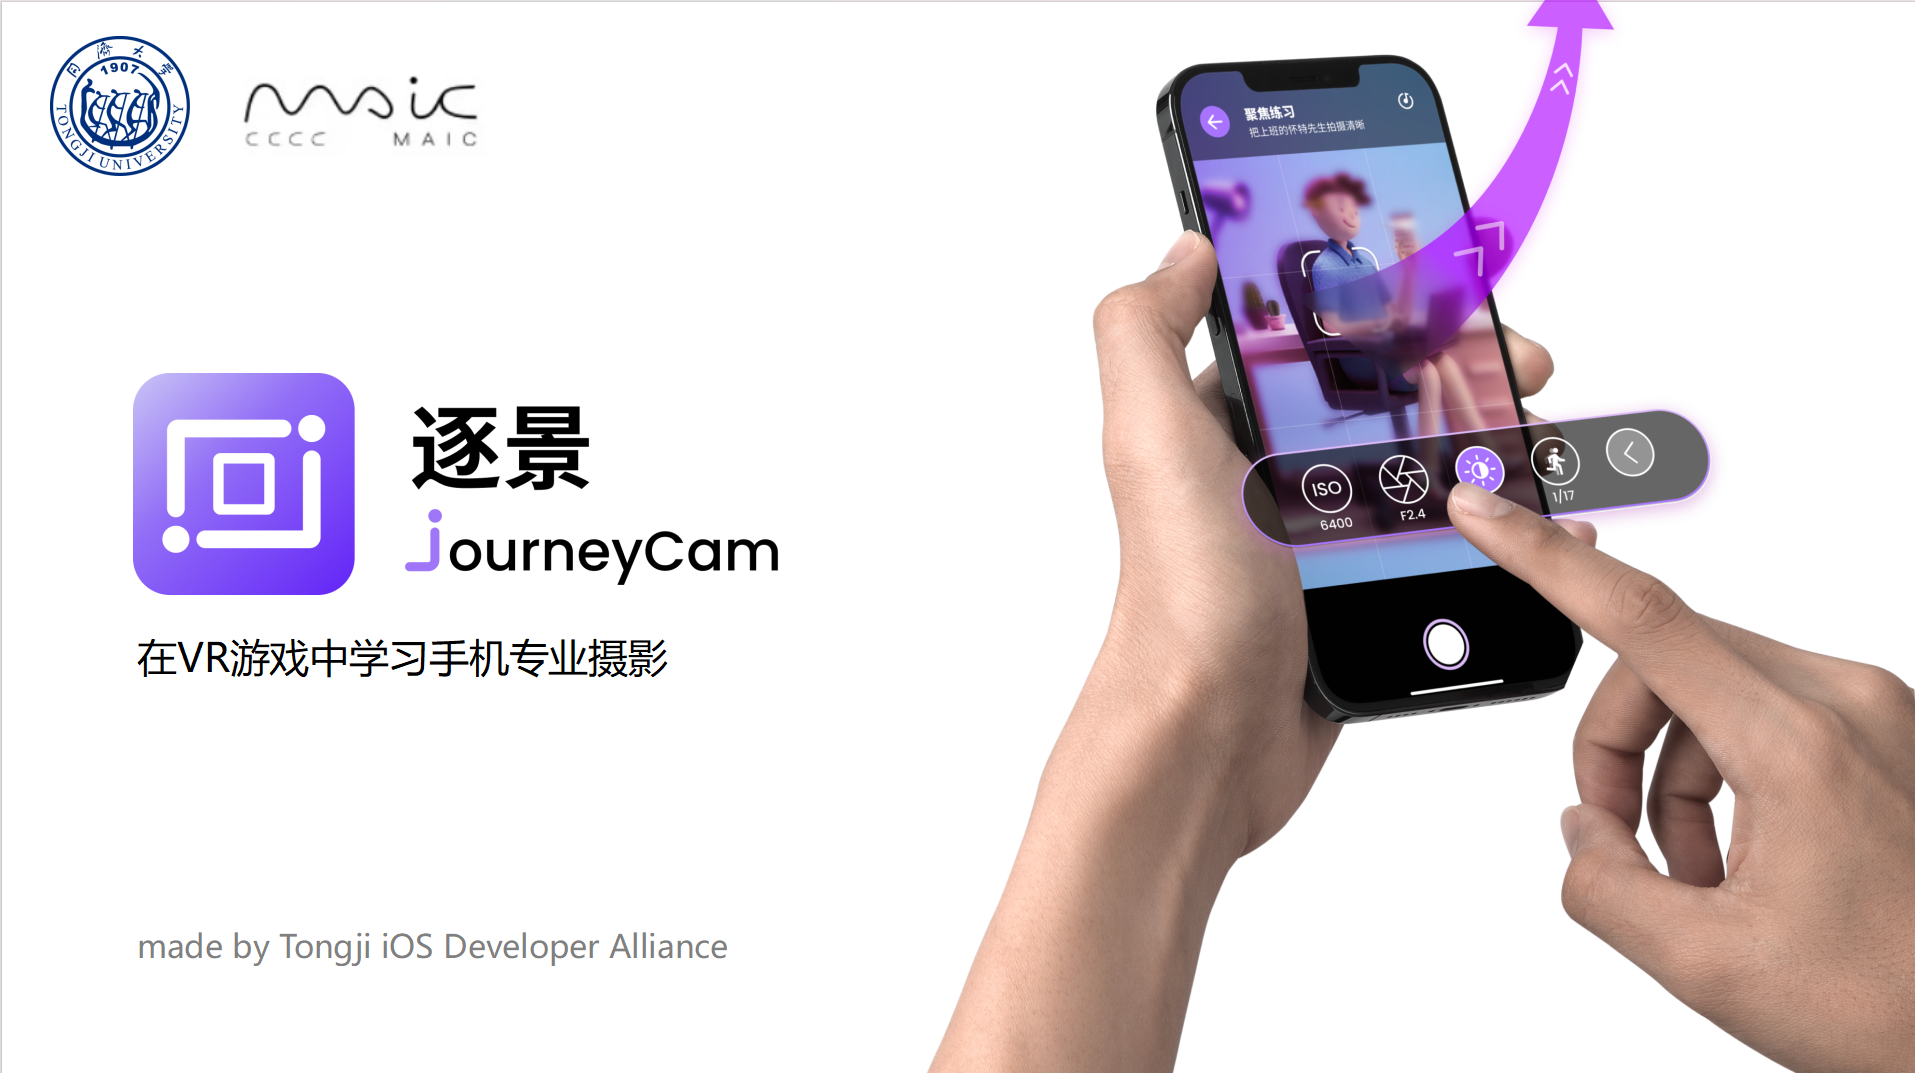 JourneyCam: VR-assisted photography teaching APP